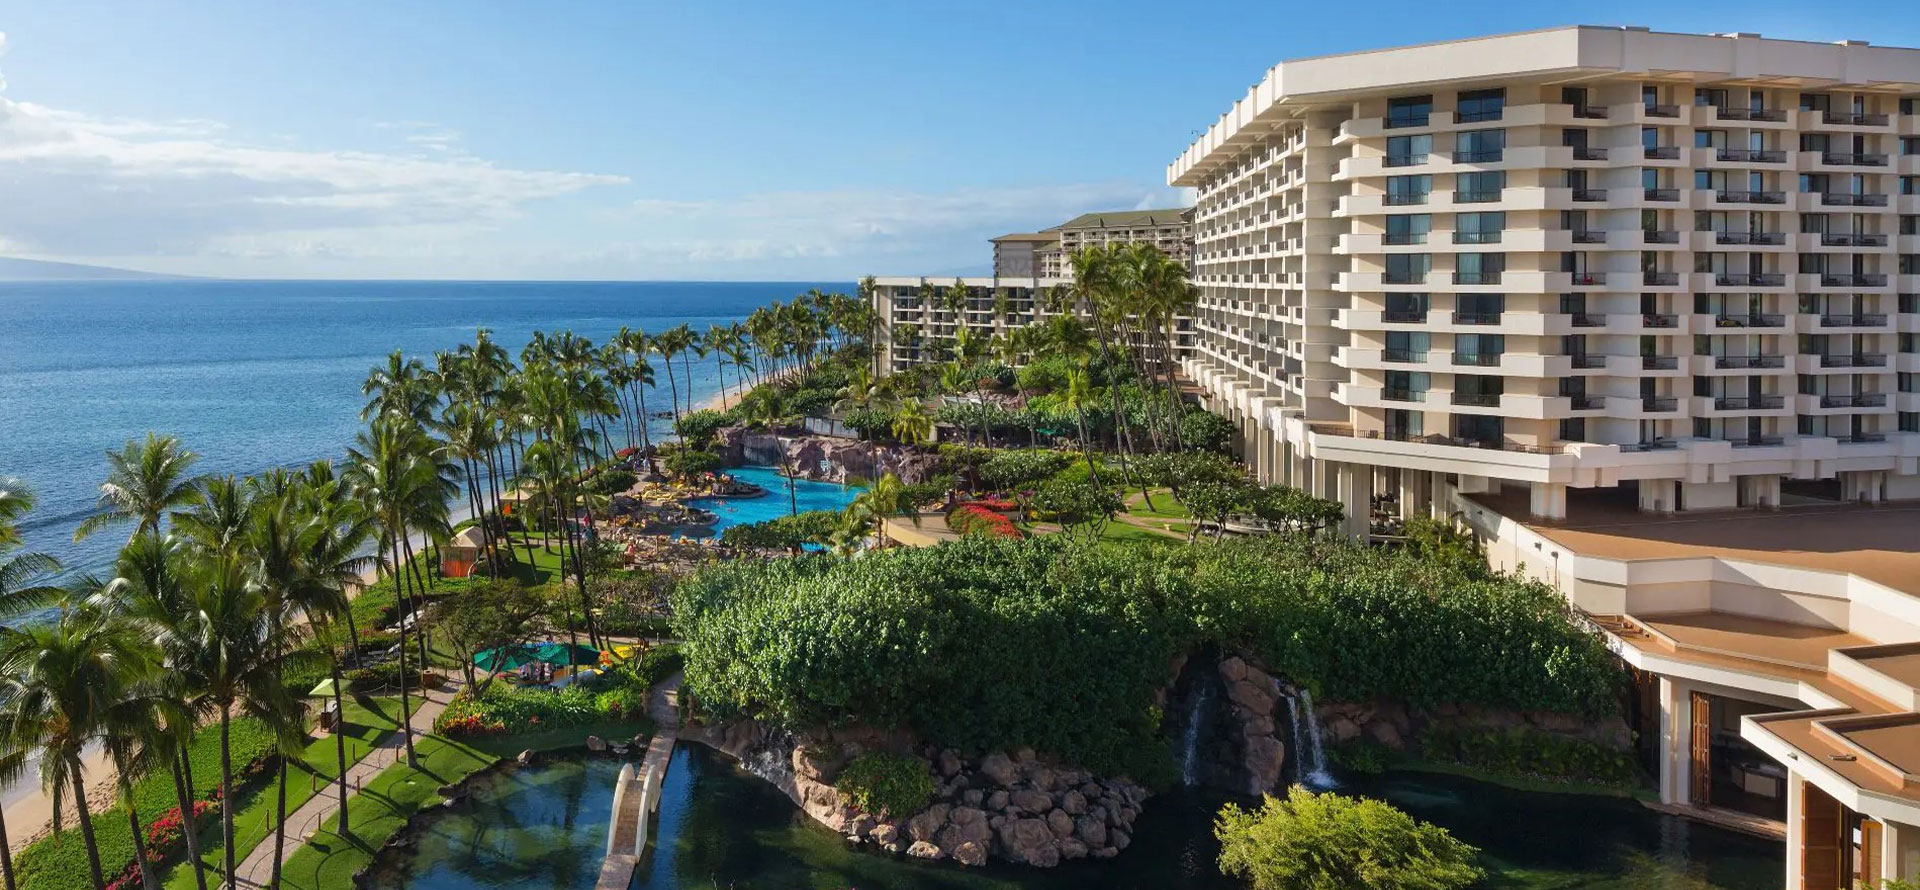 Top view of Maui All-Inclusive Family Resorts.